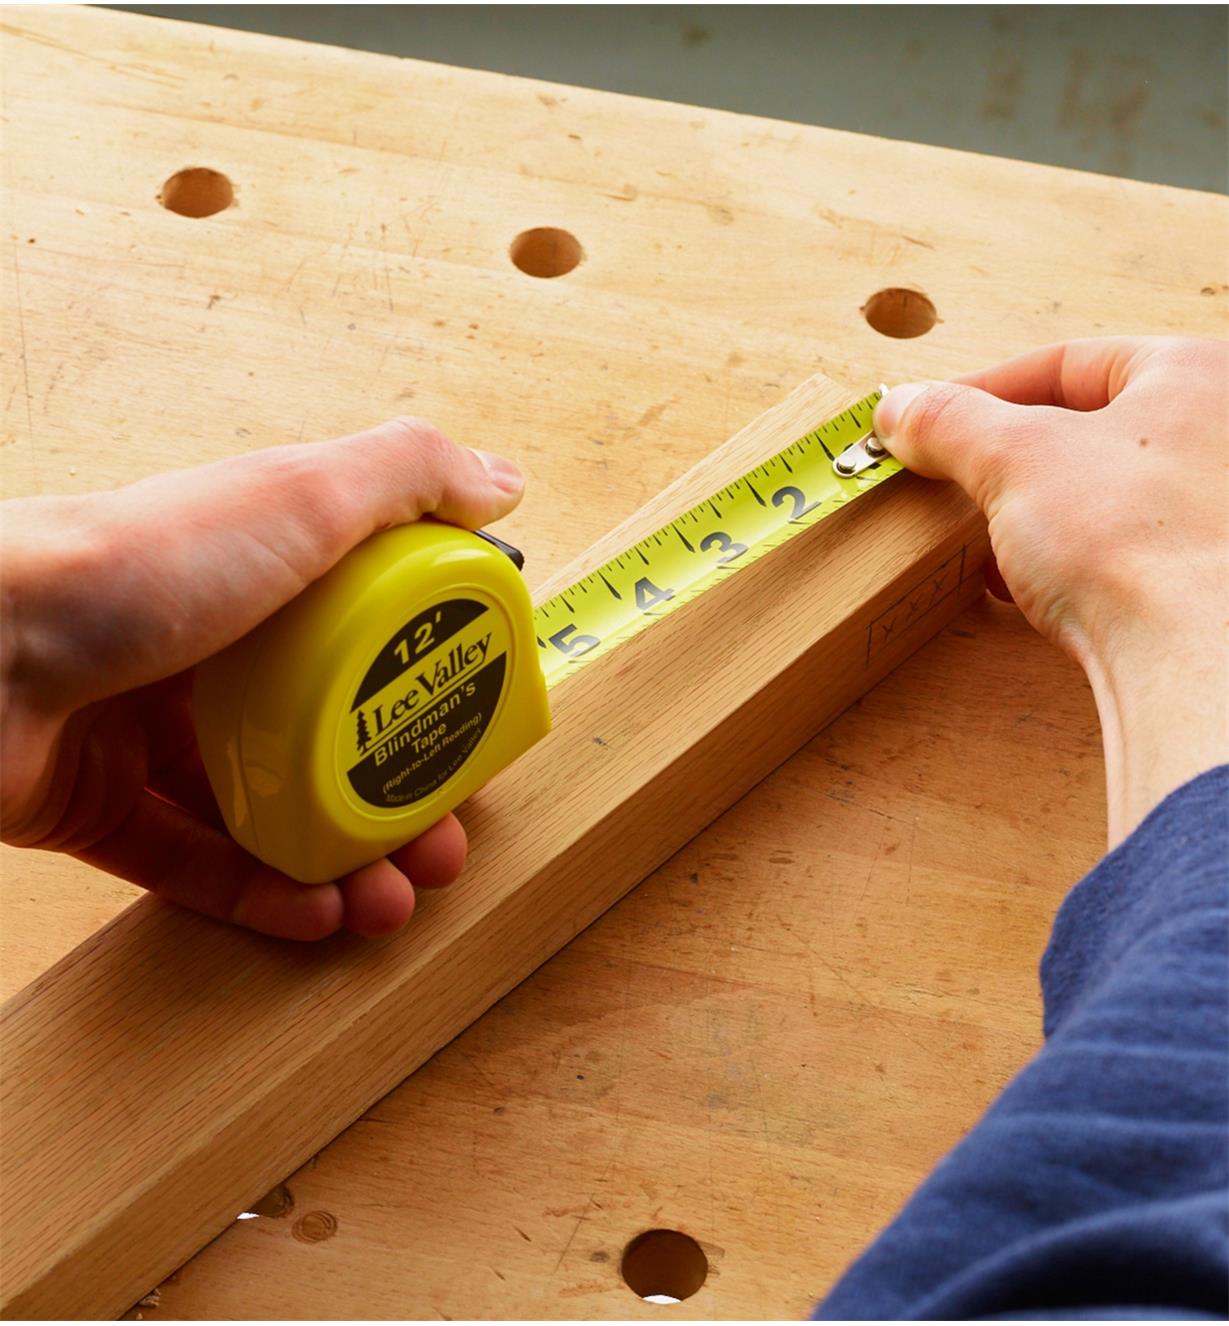 Measuring a board with a Blindman's tape